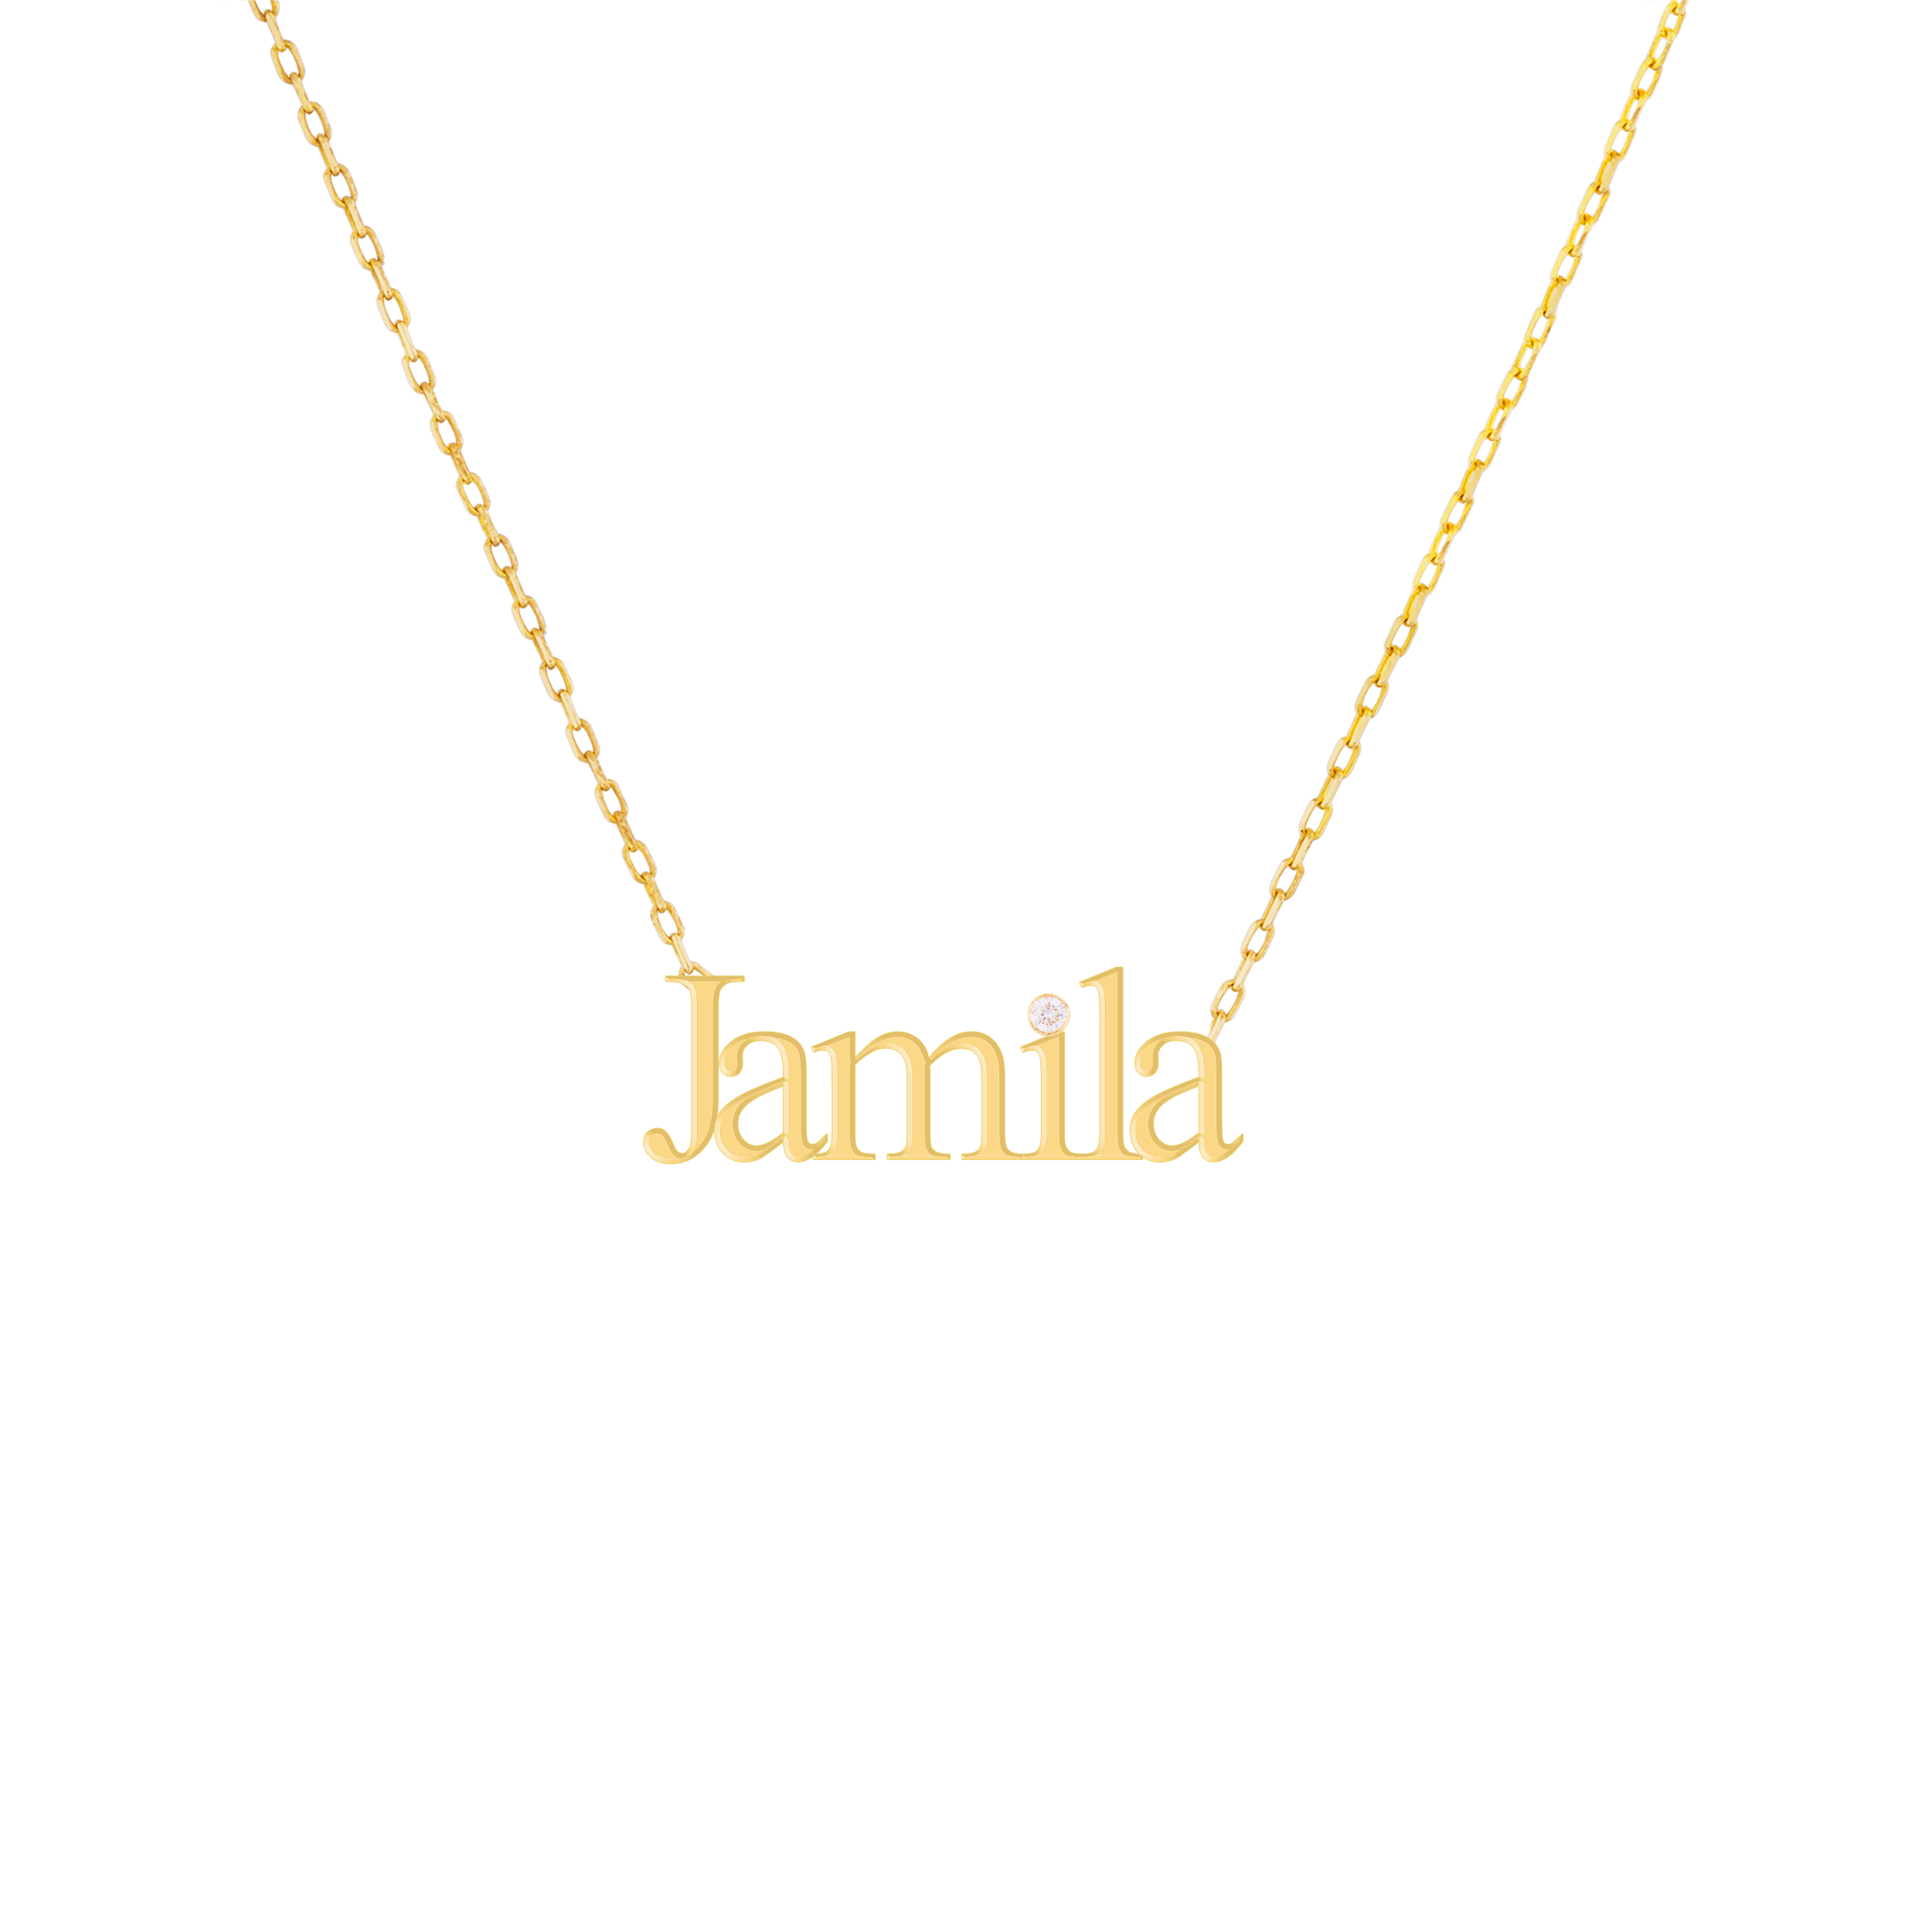 English name necklace with diamonds